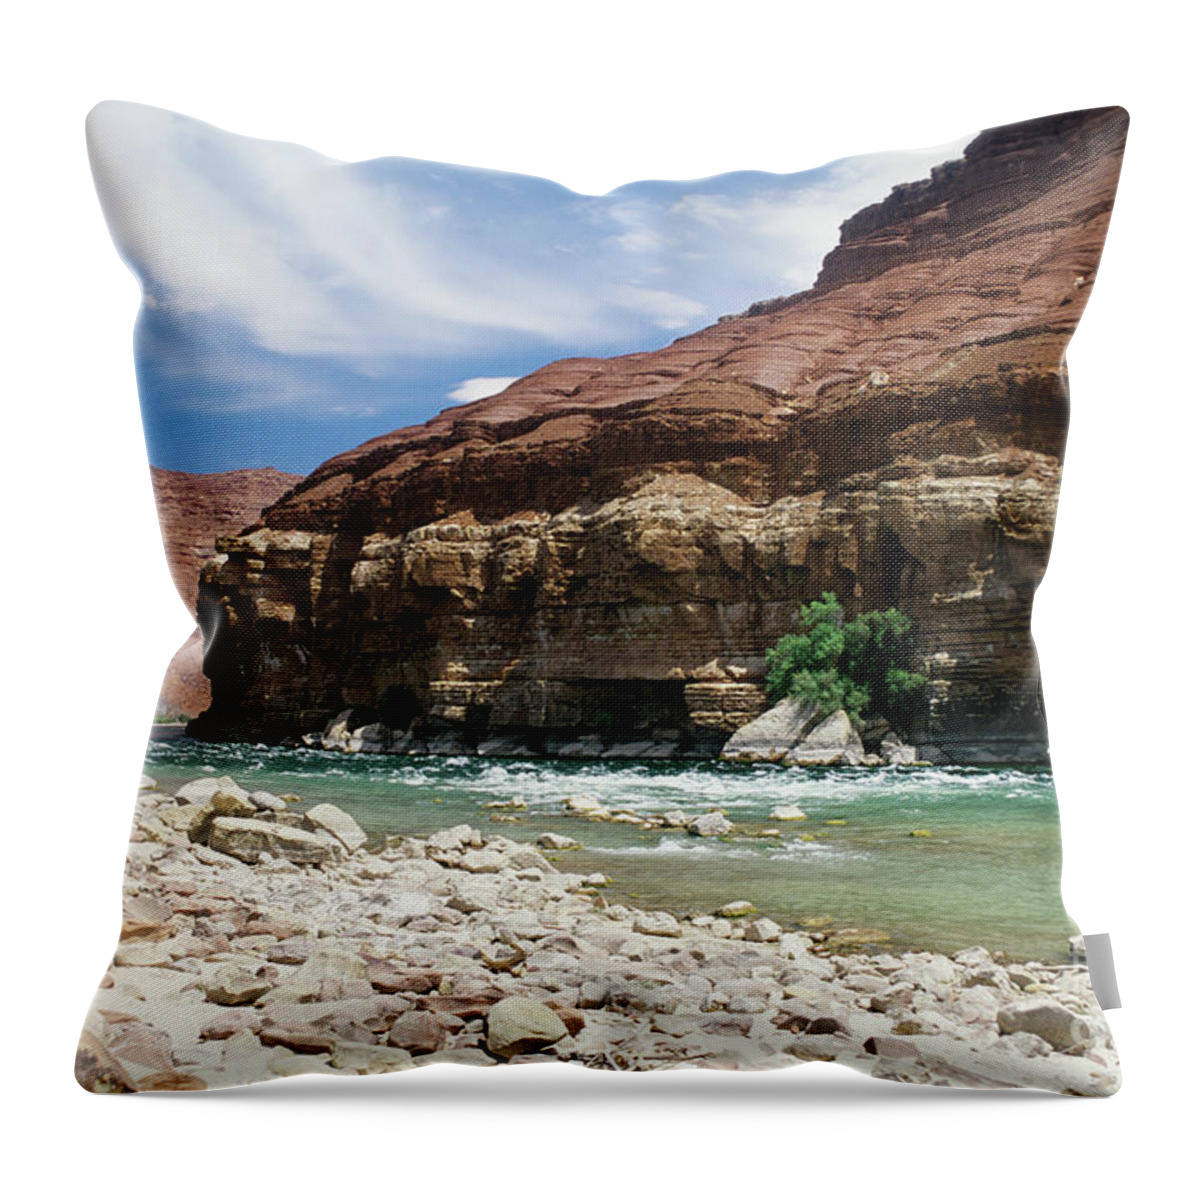 Ccolorado River Throw Pillow featuring the photograph Marble Canyon by Kathy McClure